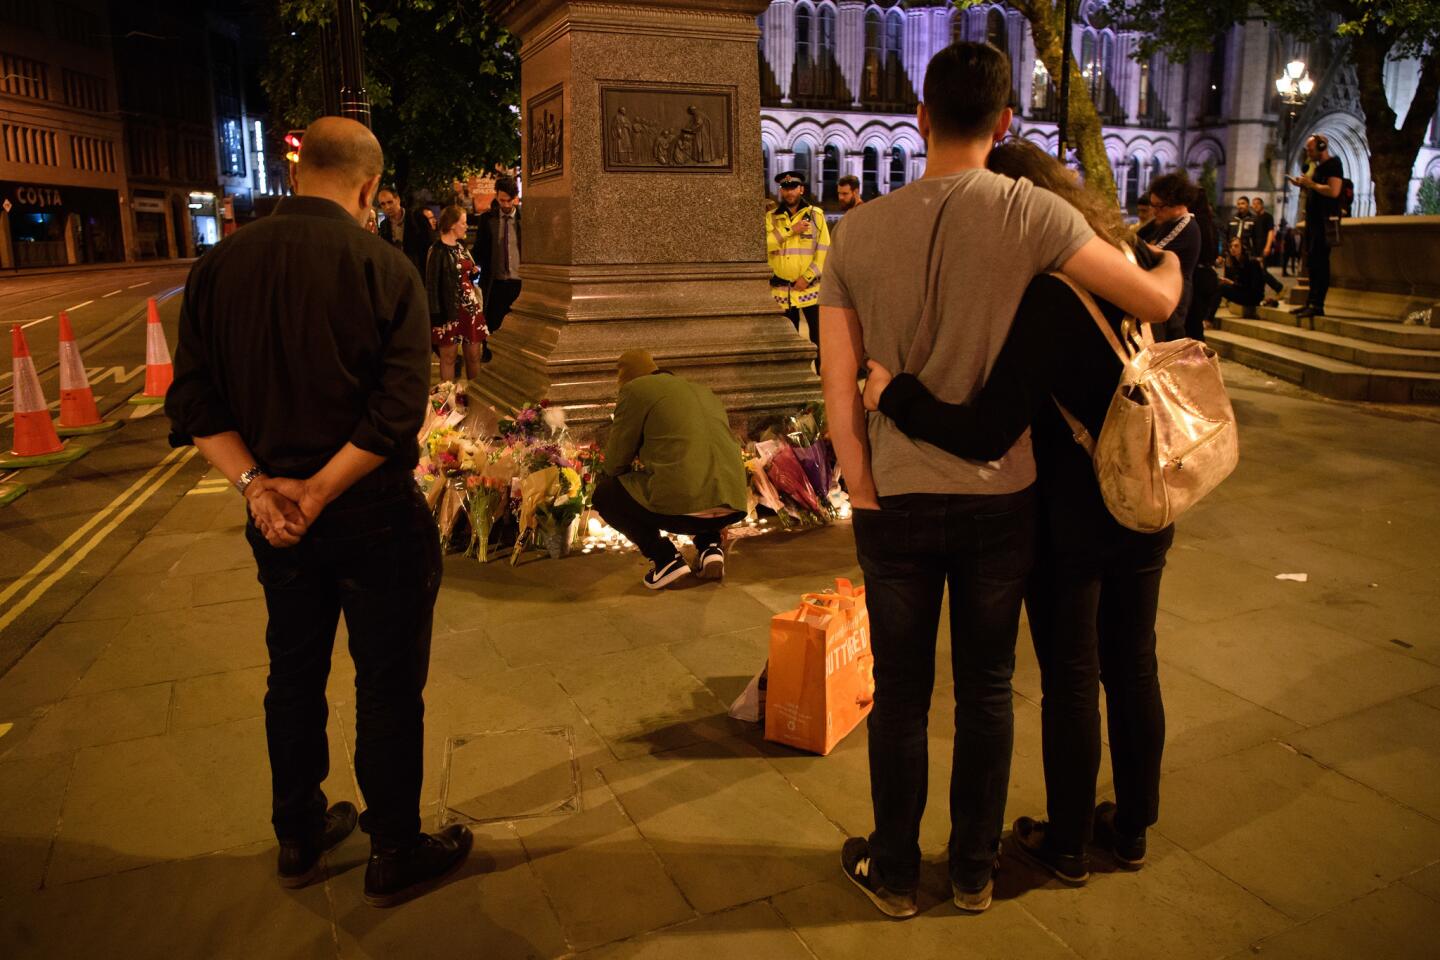 Visitors look at floral tributes after an evening vigil outside Town Hall on May 23, 2017, in Manchester, England. An explosion occurred at Manchester Arena as concertgoers were leaving an Ariana Grande performance.